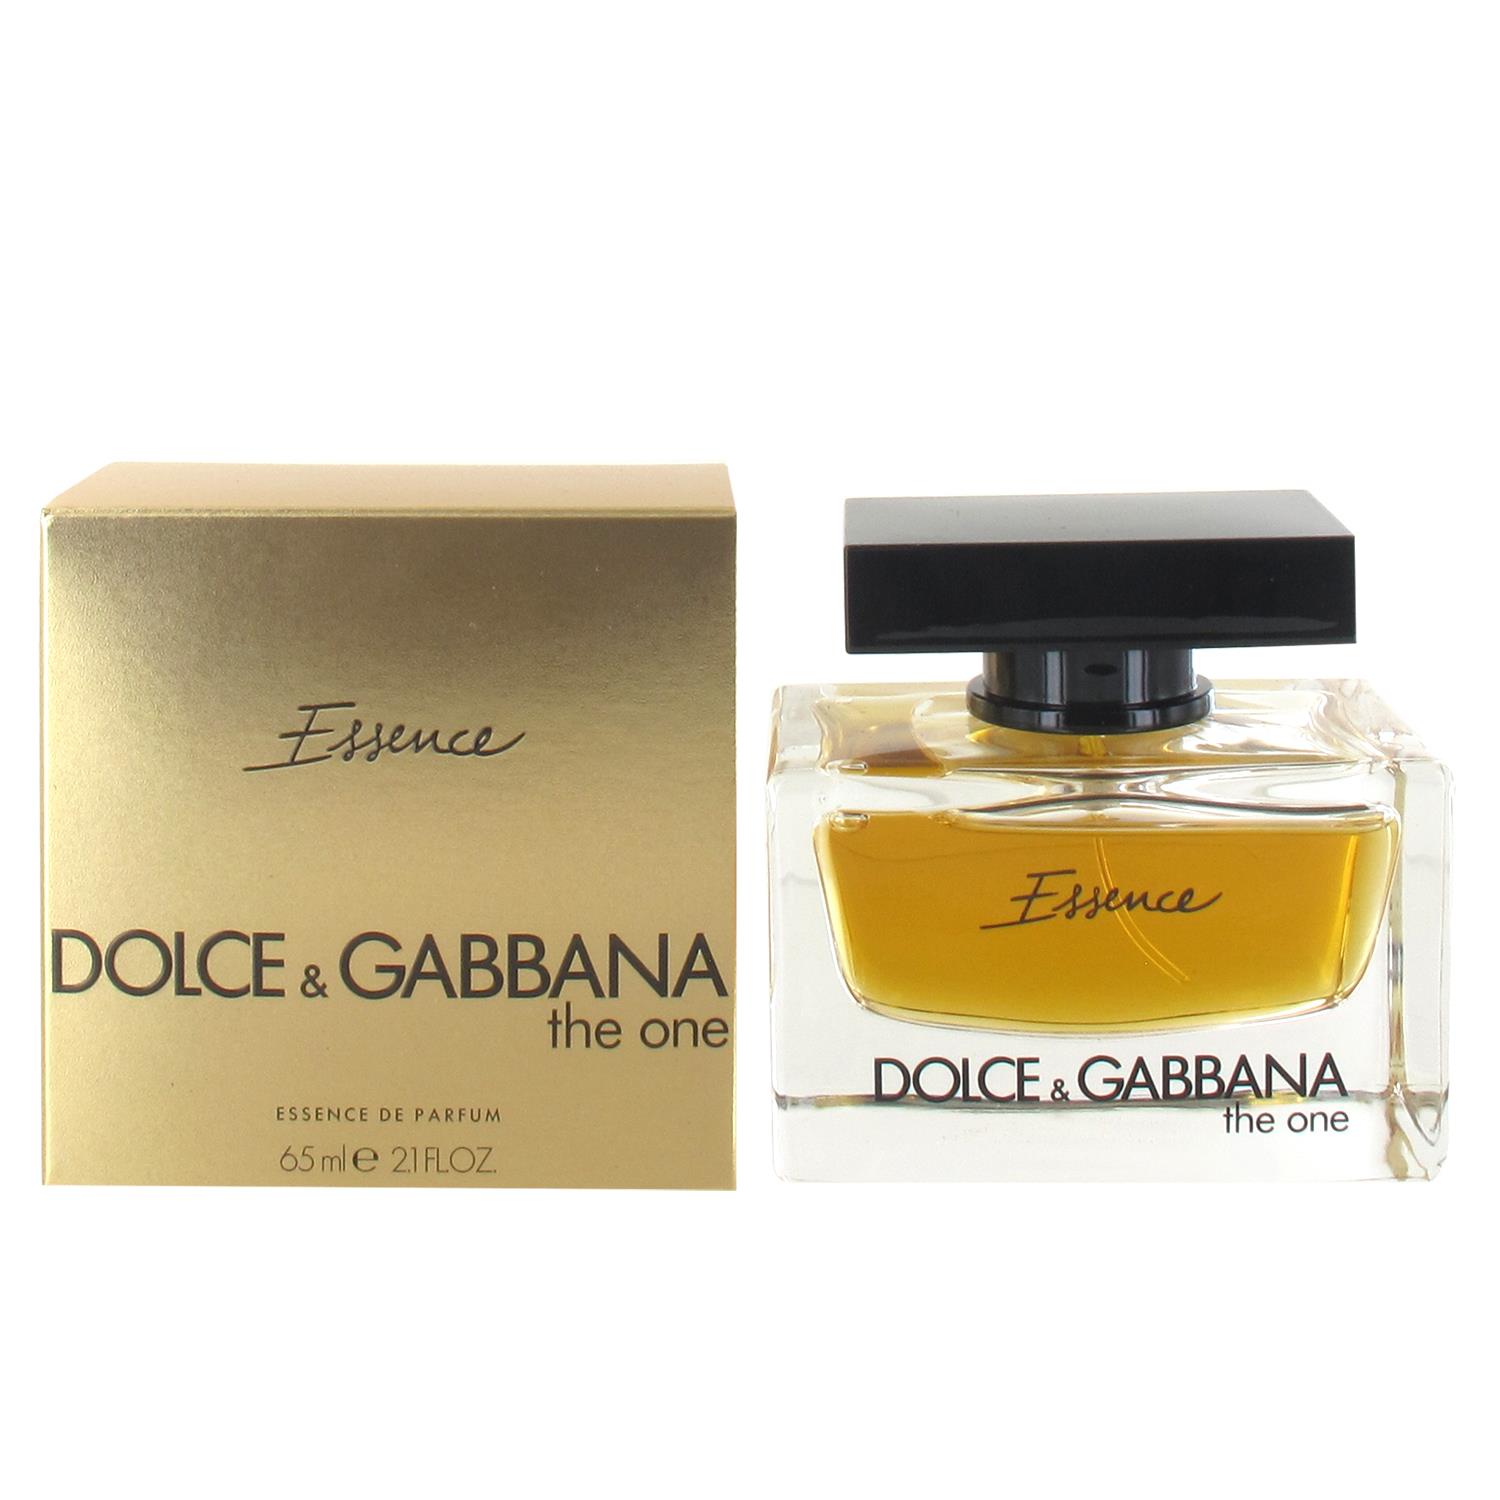 the one essence dolce and gabbana